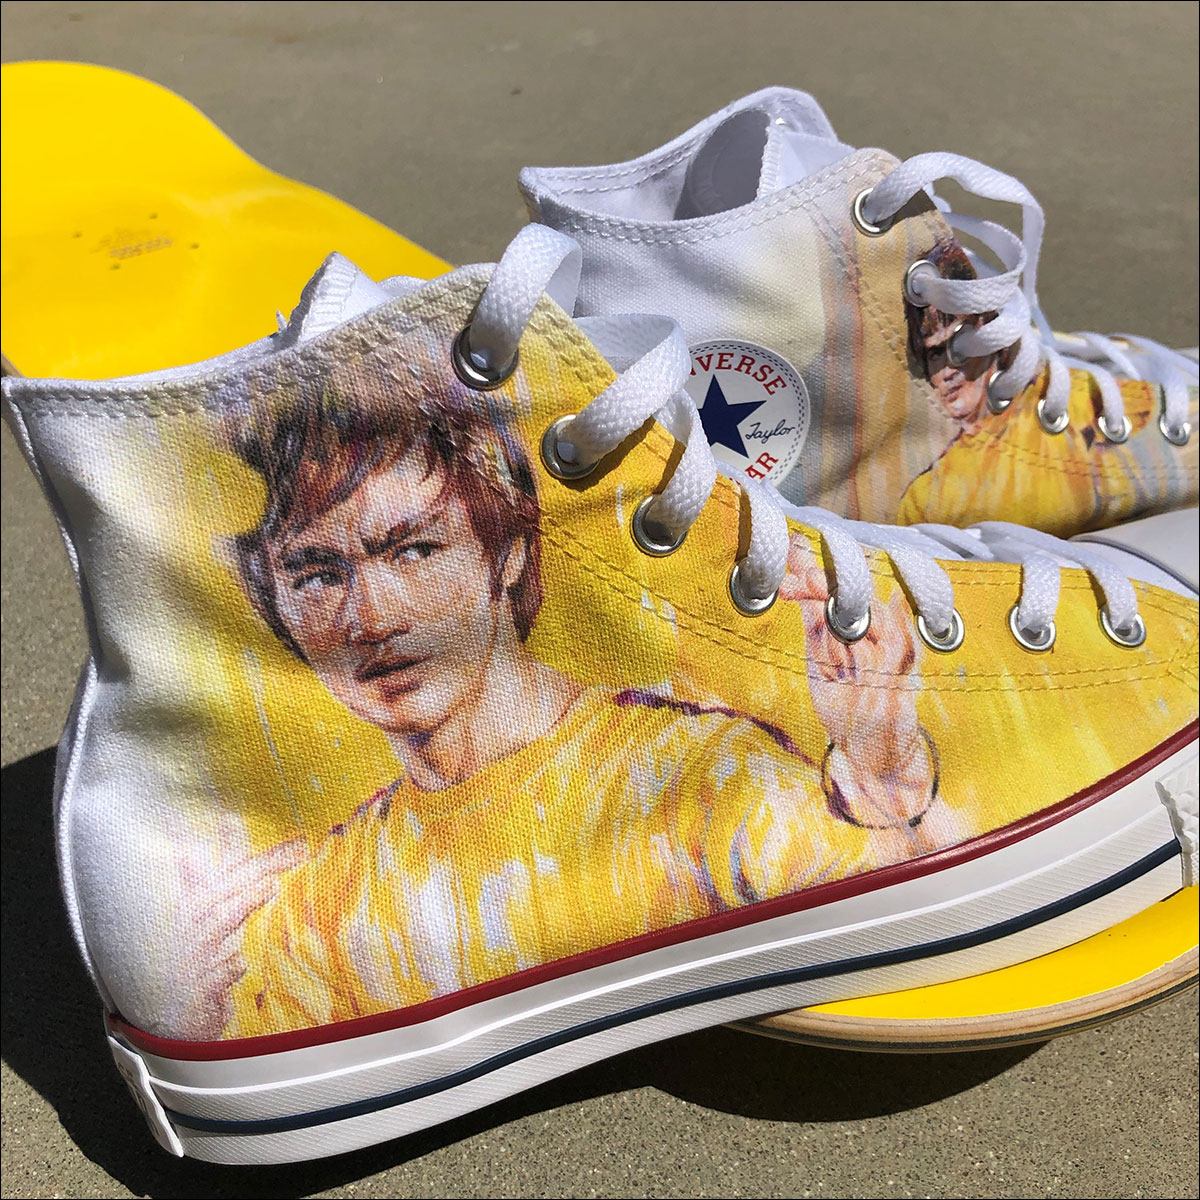 These Are Some Badass Bruce Shoes